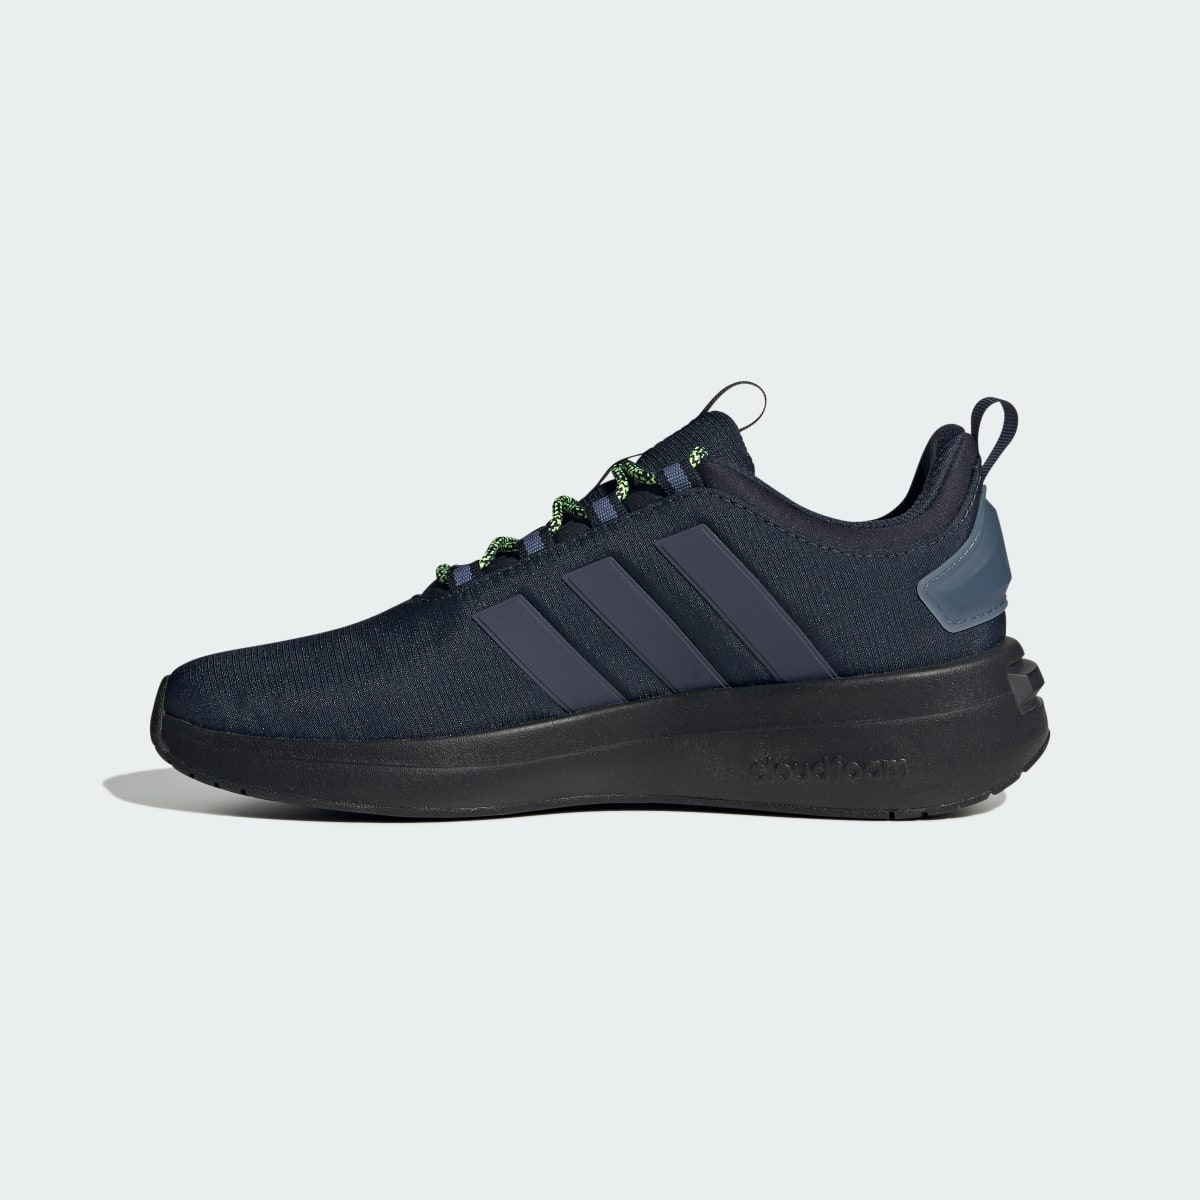 Adidas Racer TR23 Shoes. 7